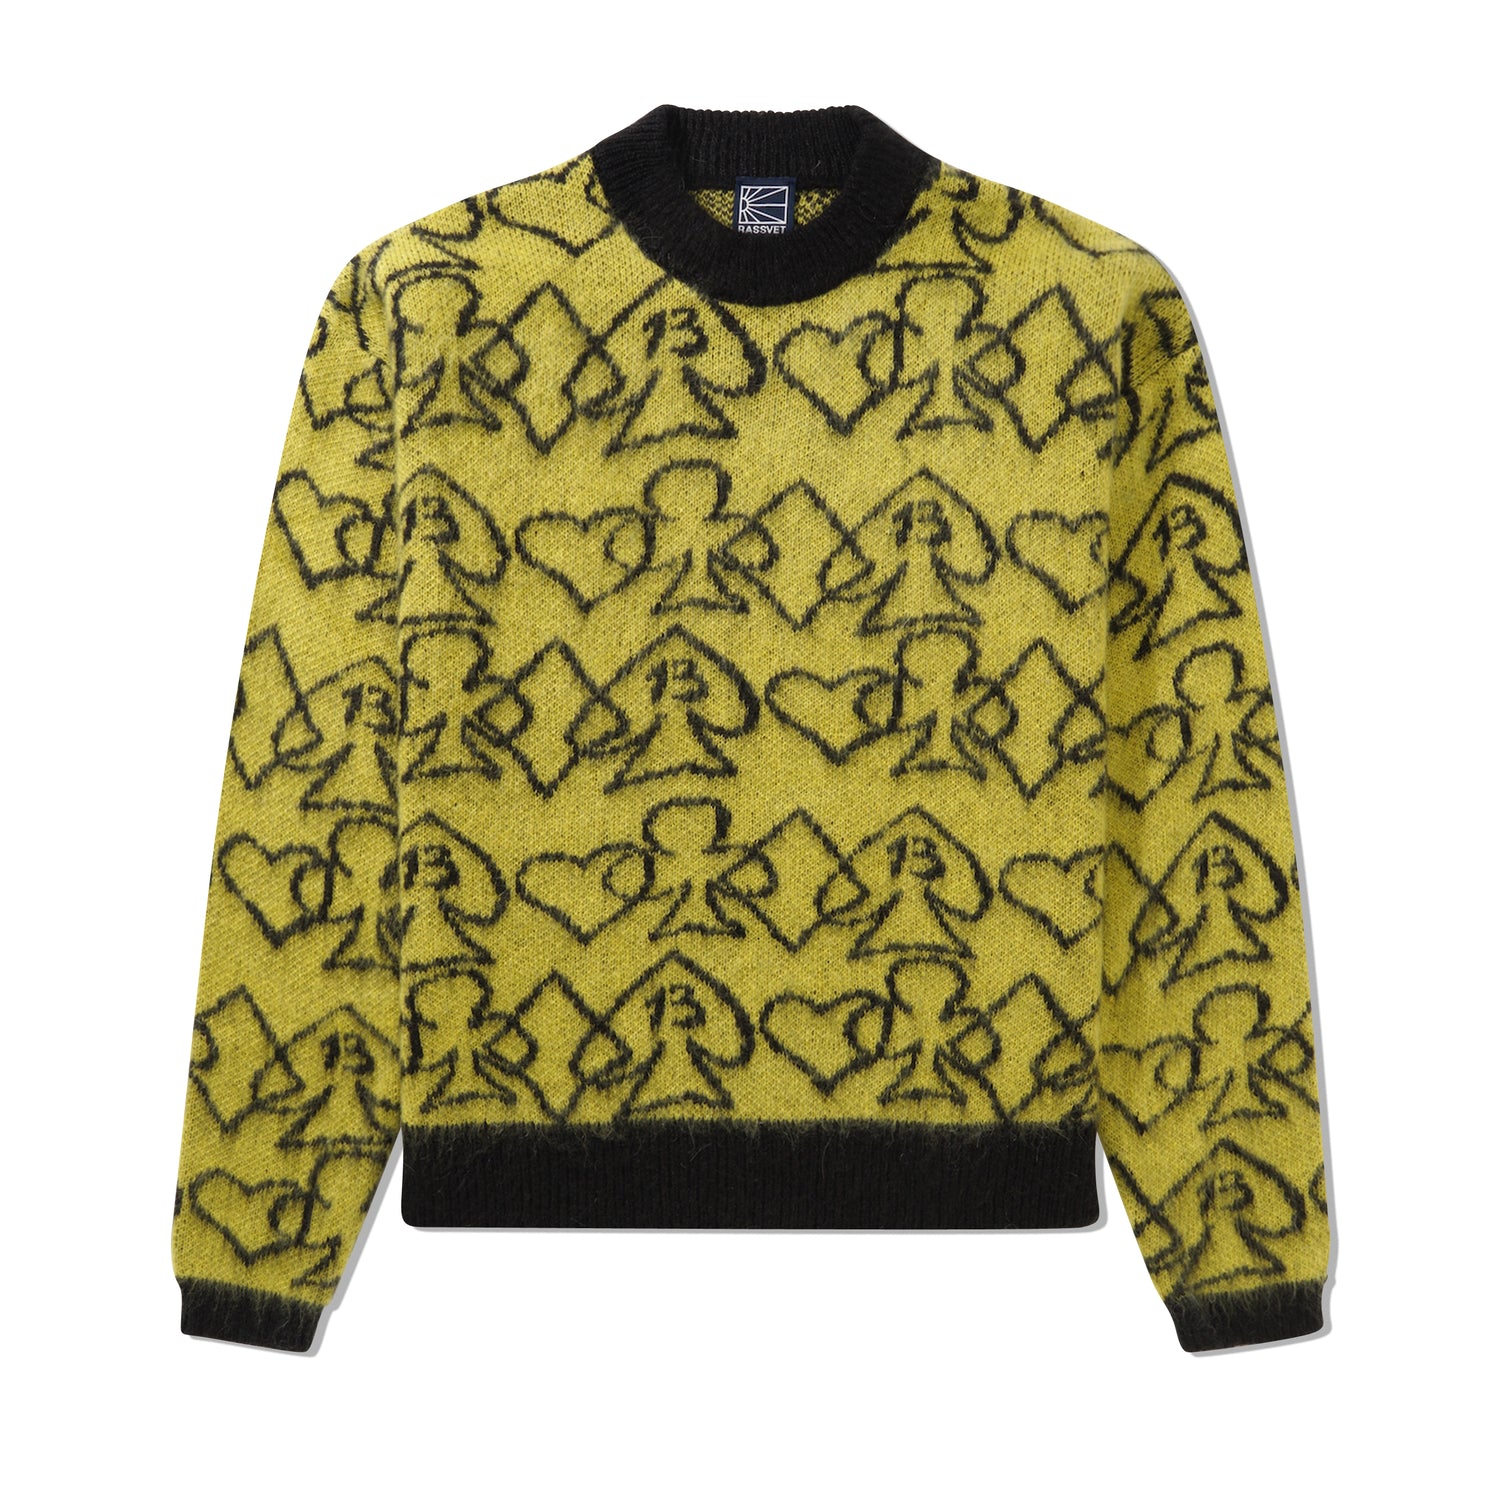 Card Suite Sweater, Yellow